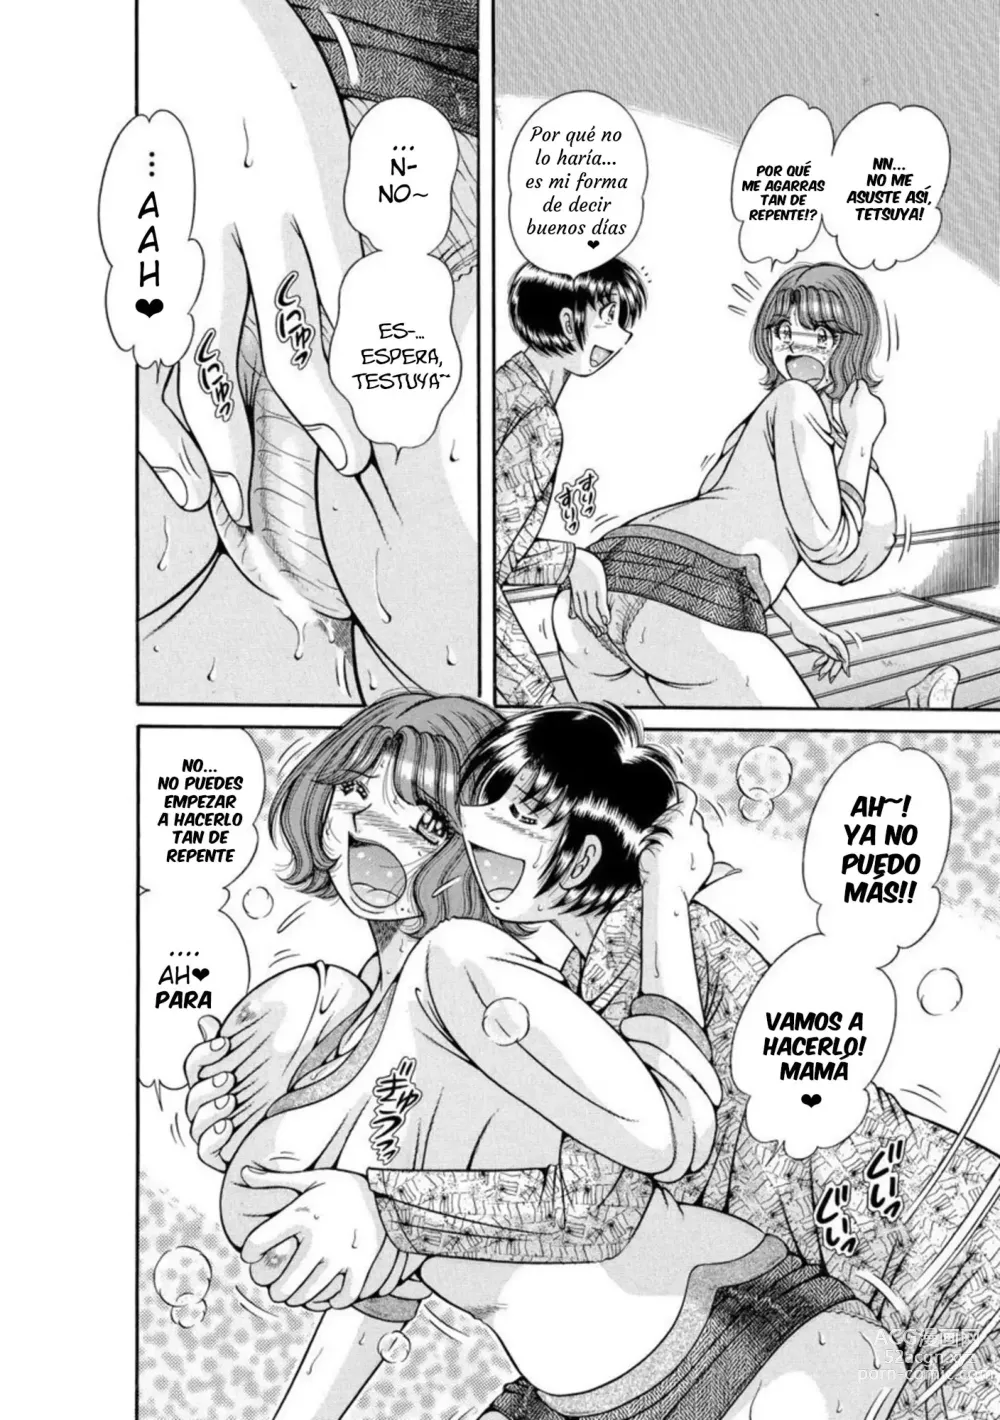 Page 3 of manga Mother and Big and Little Sisters. As Much Sex as You Want, Every Day, With All 5 of Them. Part 2